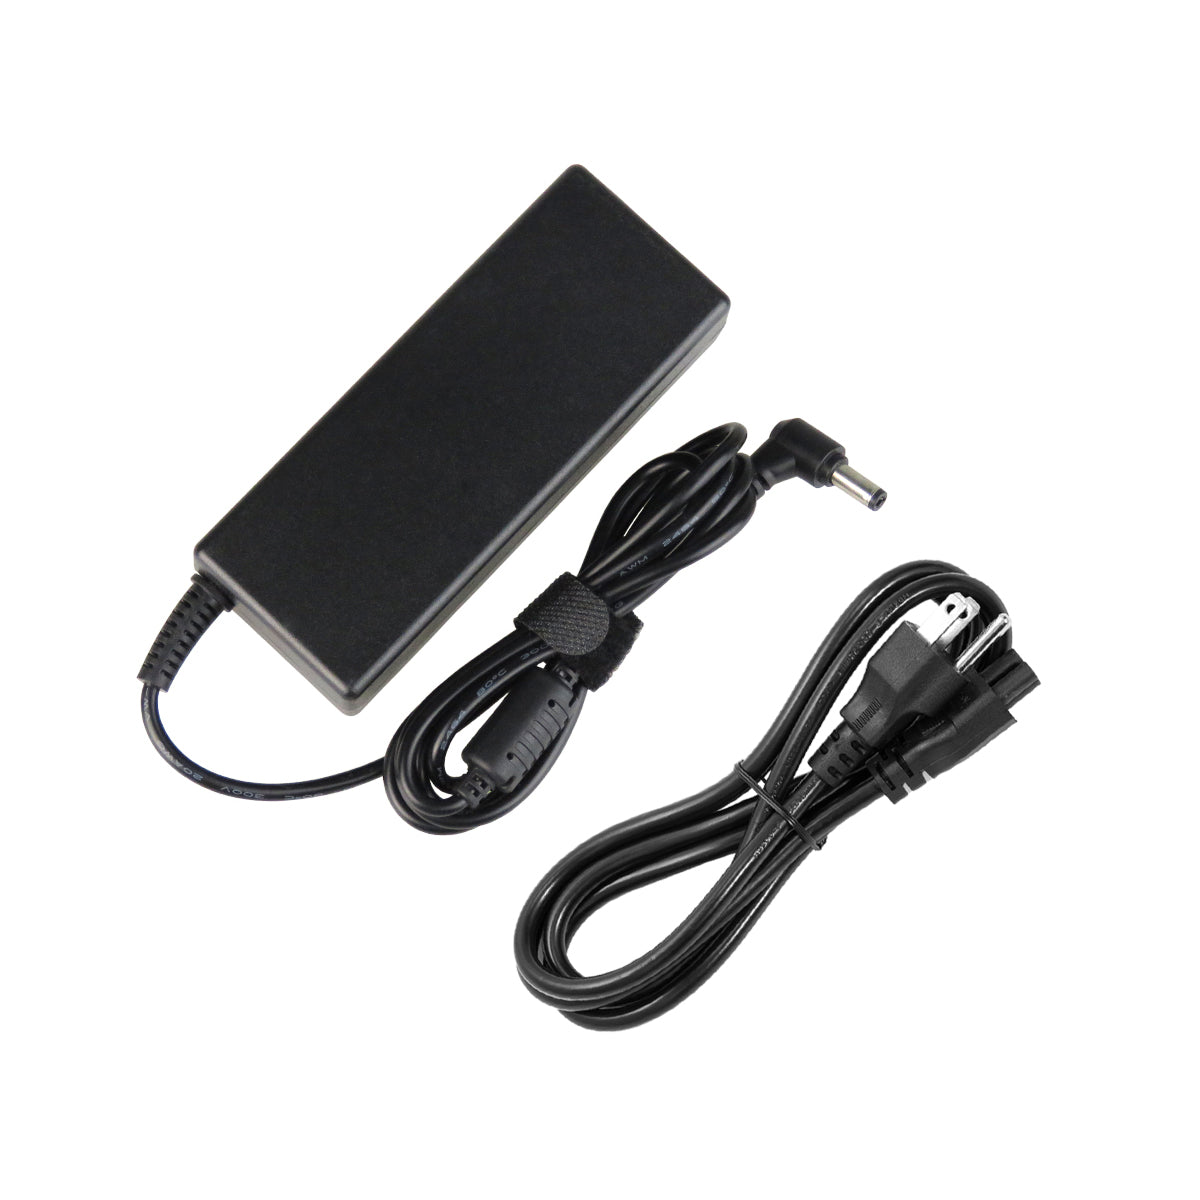 AC Adapter Charger for ASUS K43SD Notebook.